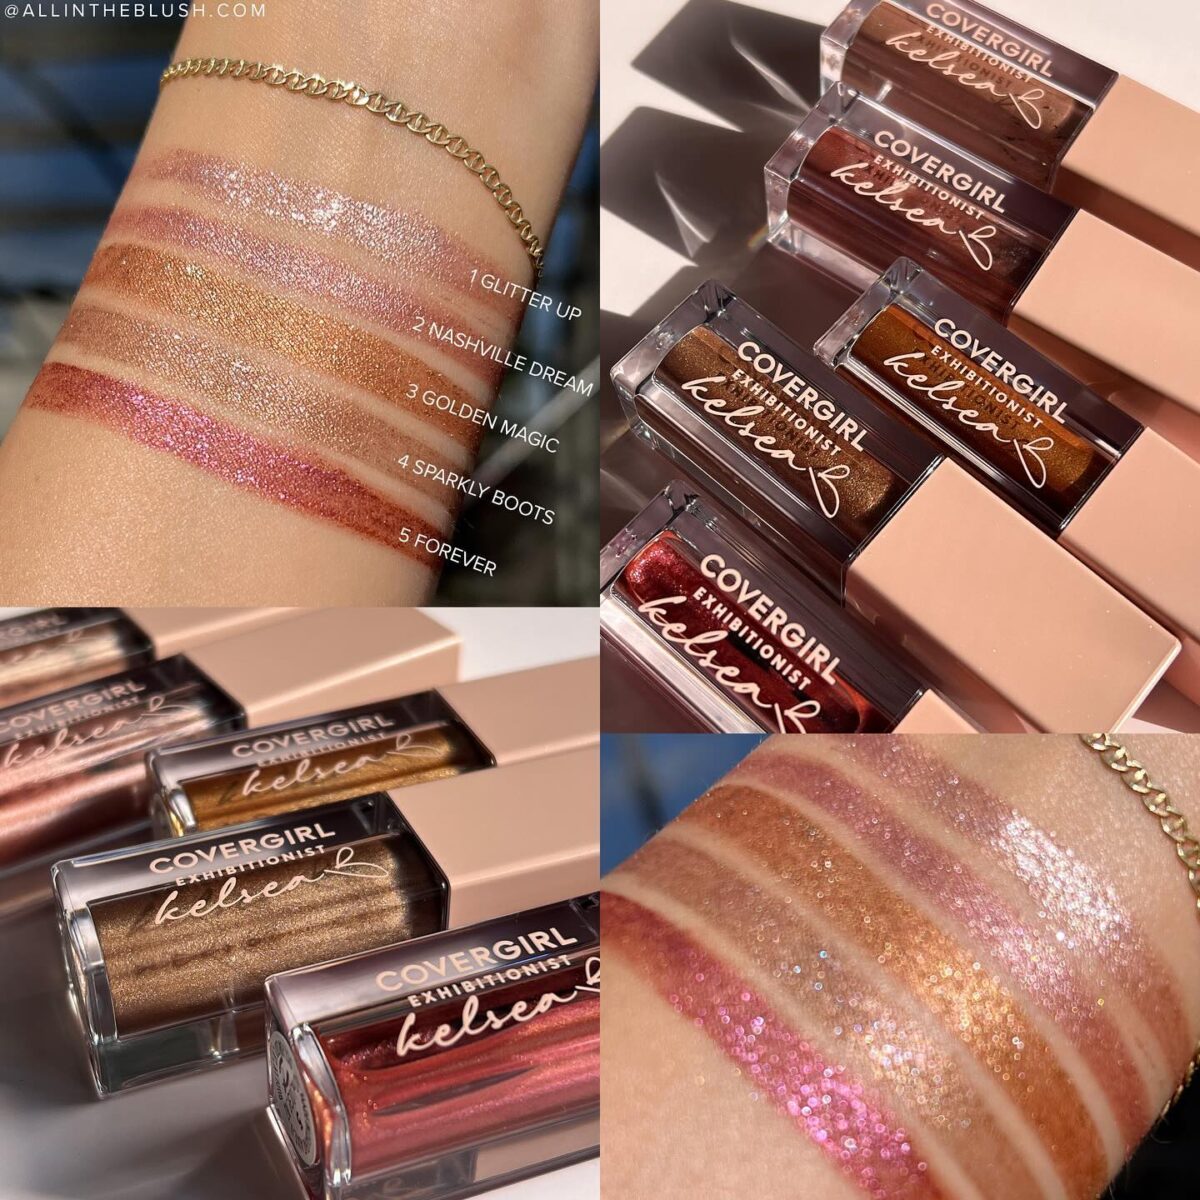 Covergirl Exhibitionist by Kelsea Ballerini Liquid Glitter Eyeshadow Review and Swatches